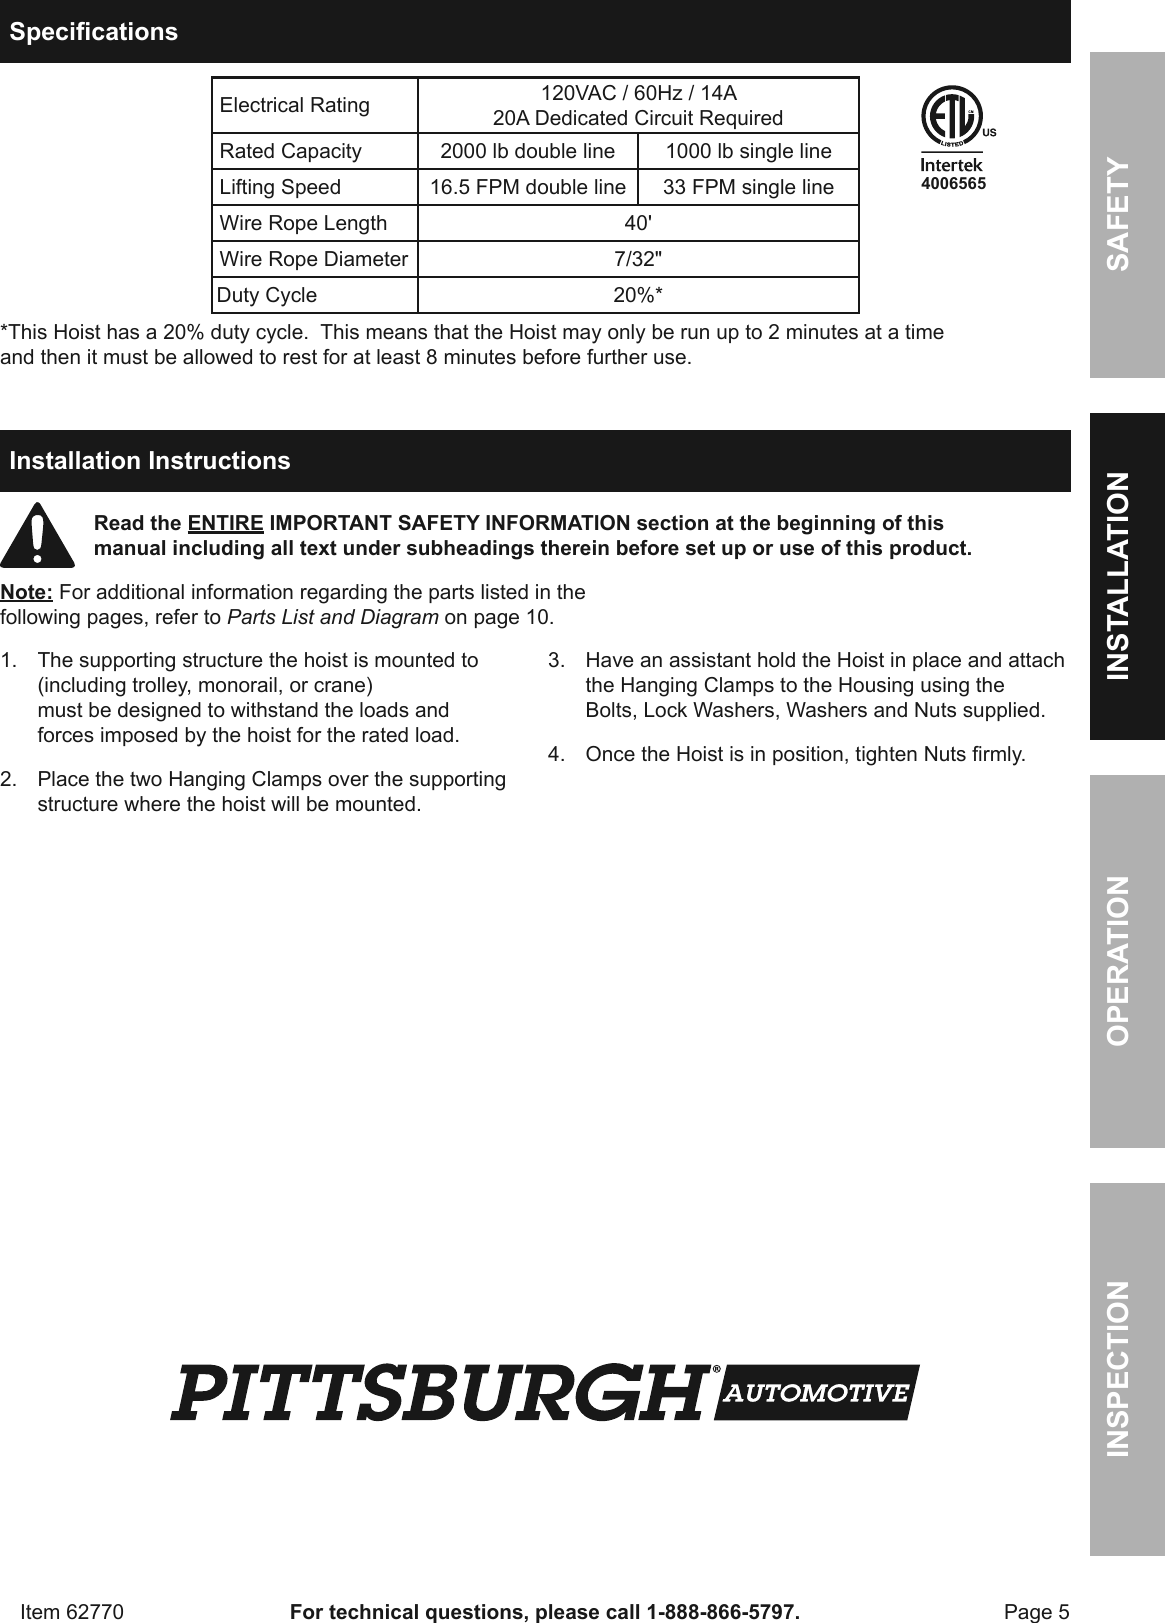 Page 5 of 12 - Manual For The 62770 2000 Lb. Electric Hoist With Remote Control